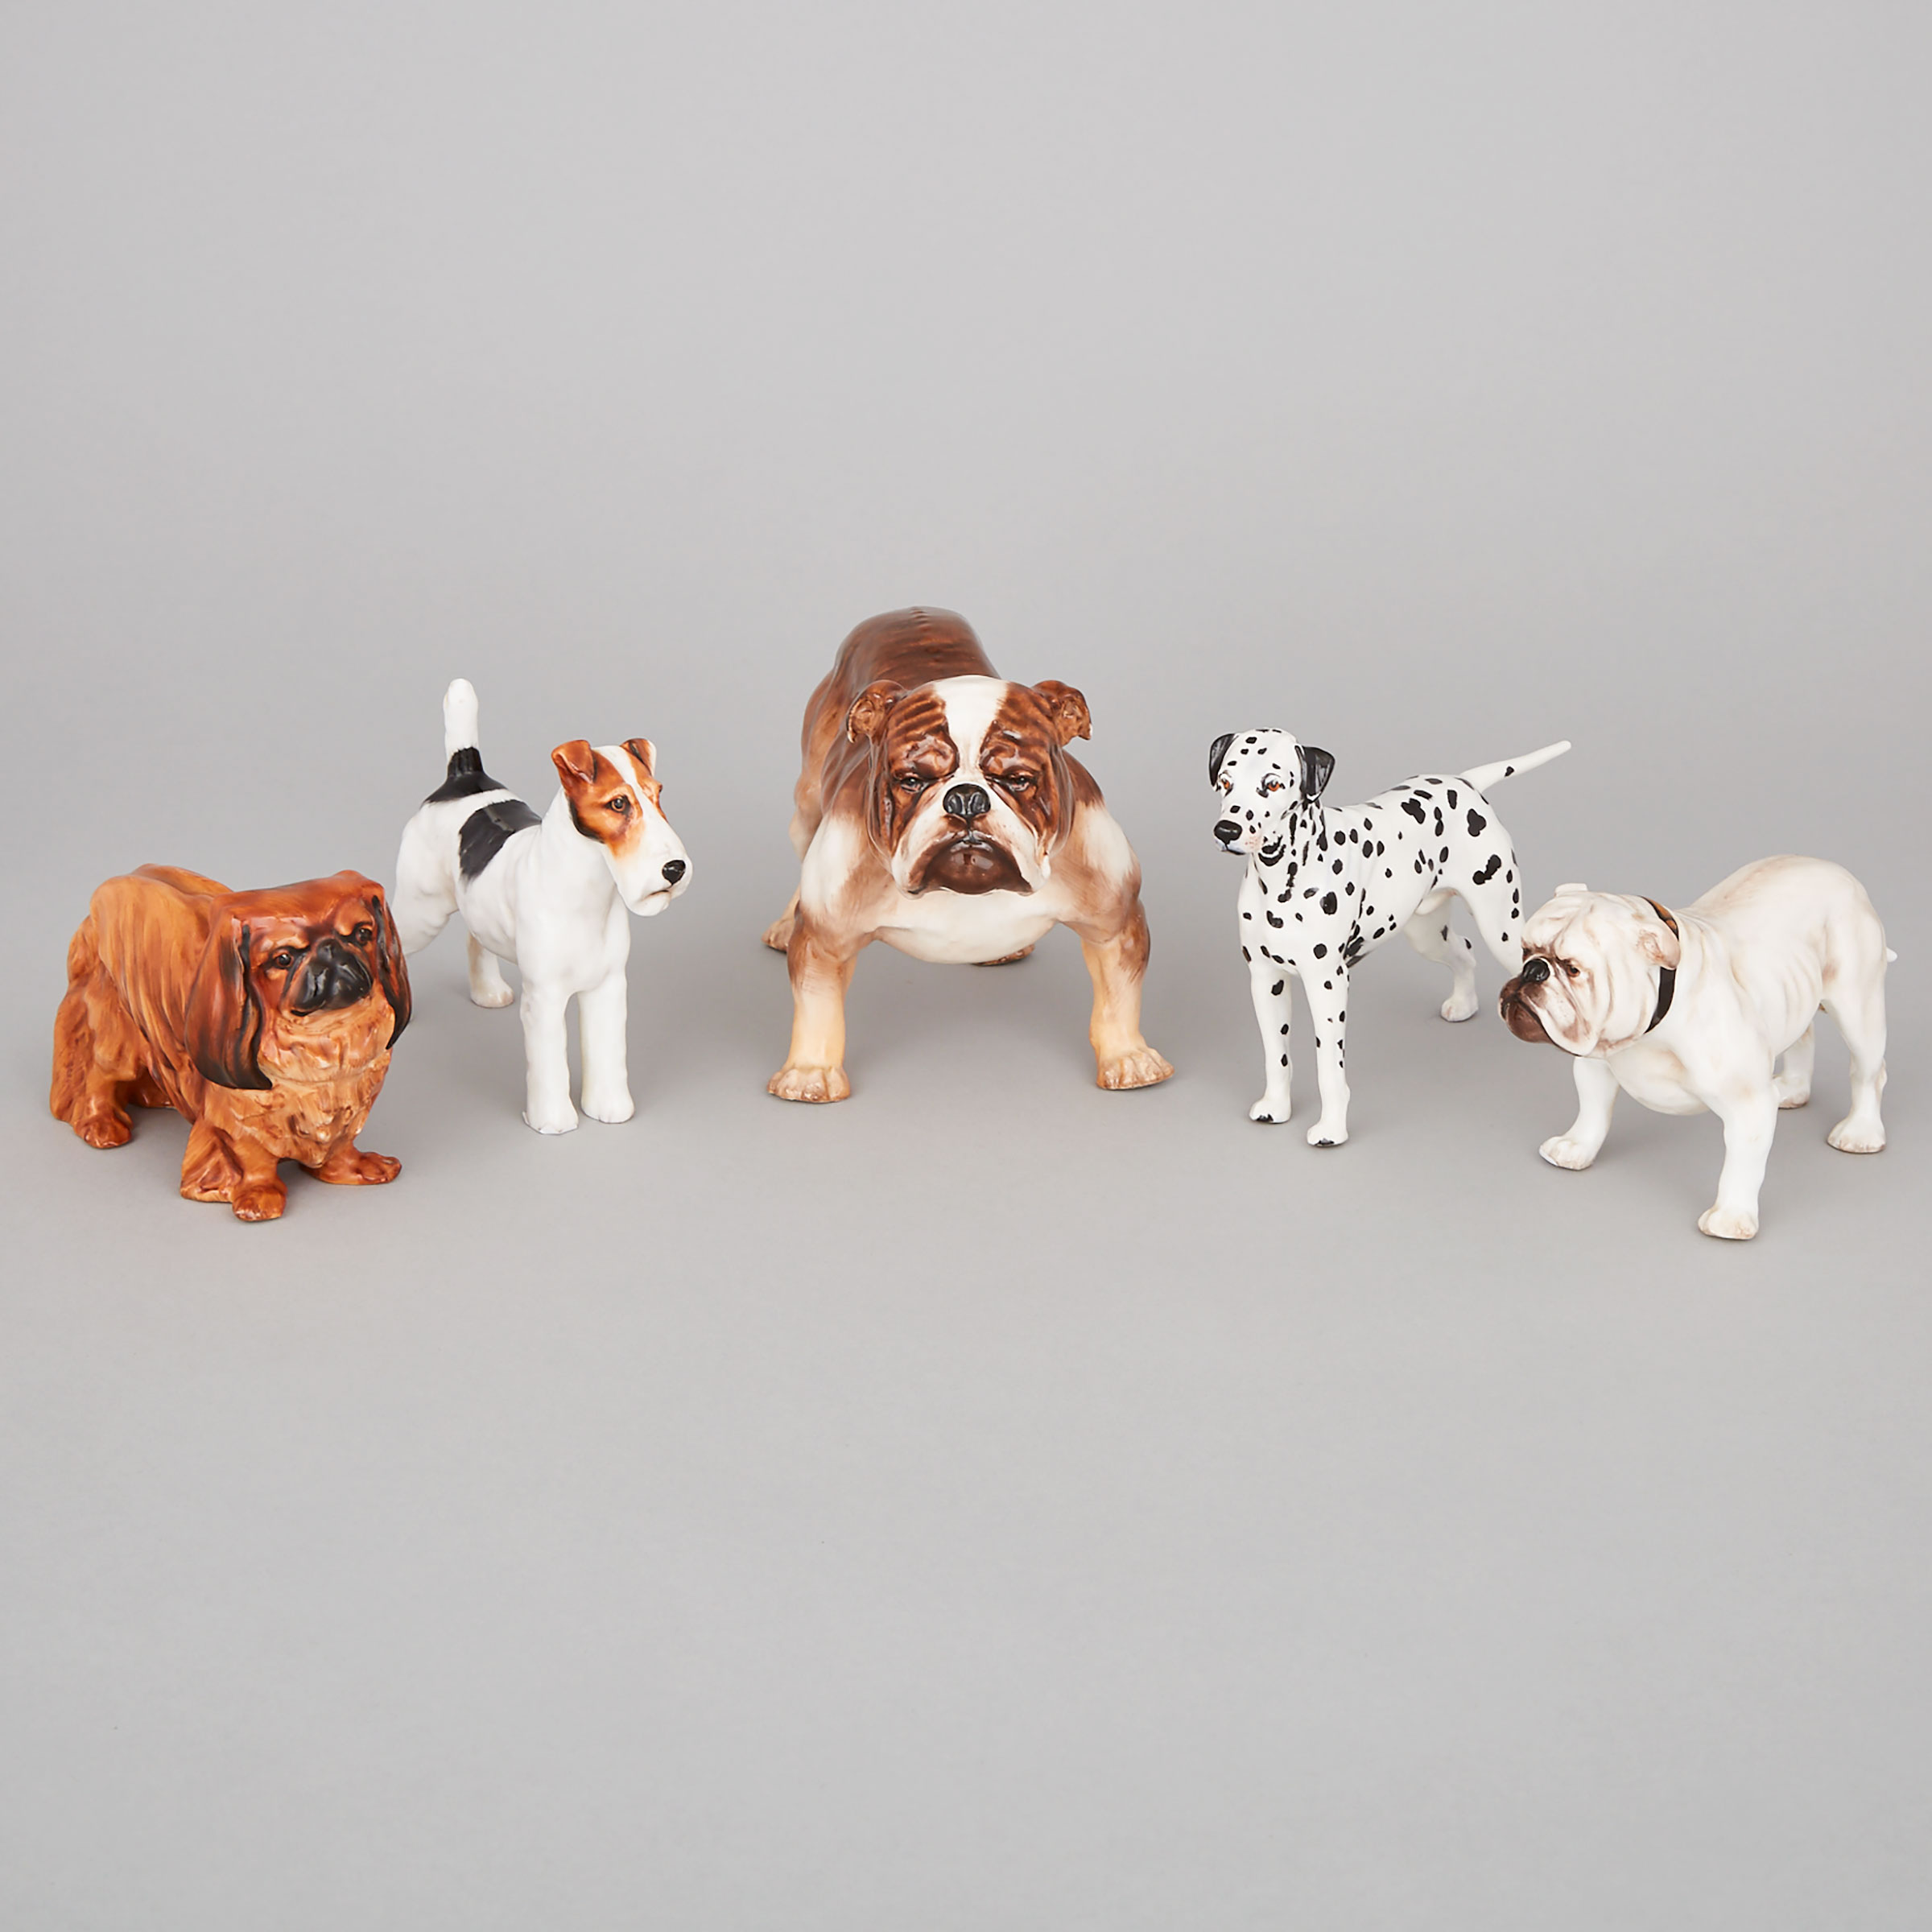 Five Royal Doulton Dog Figurines, 20th century